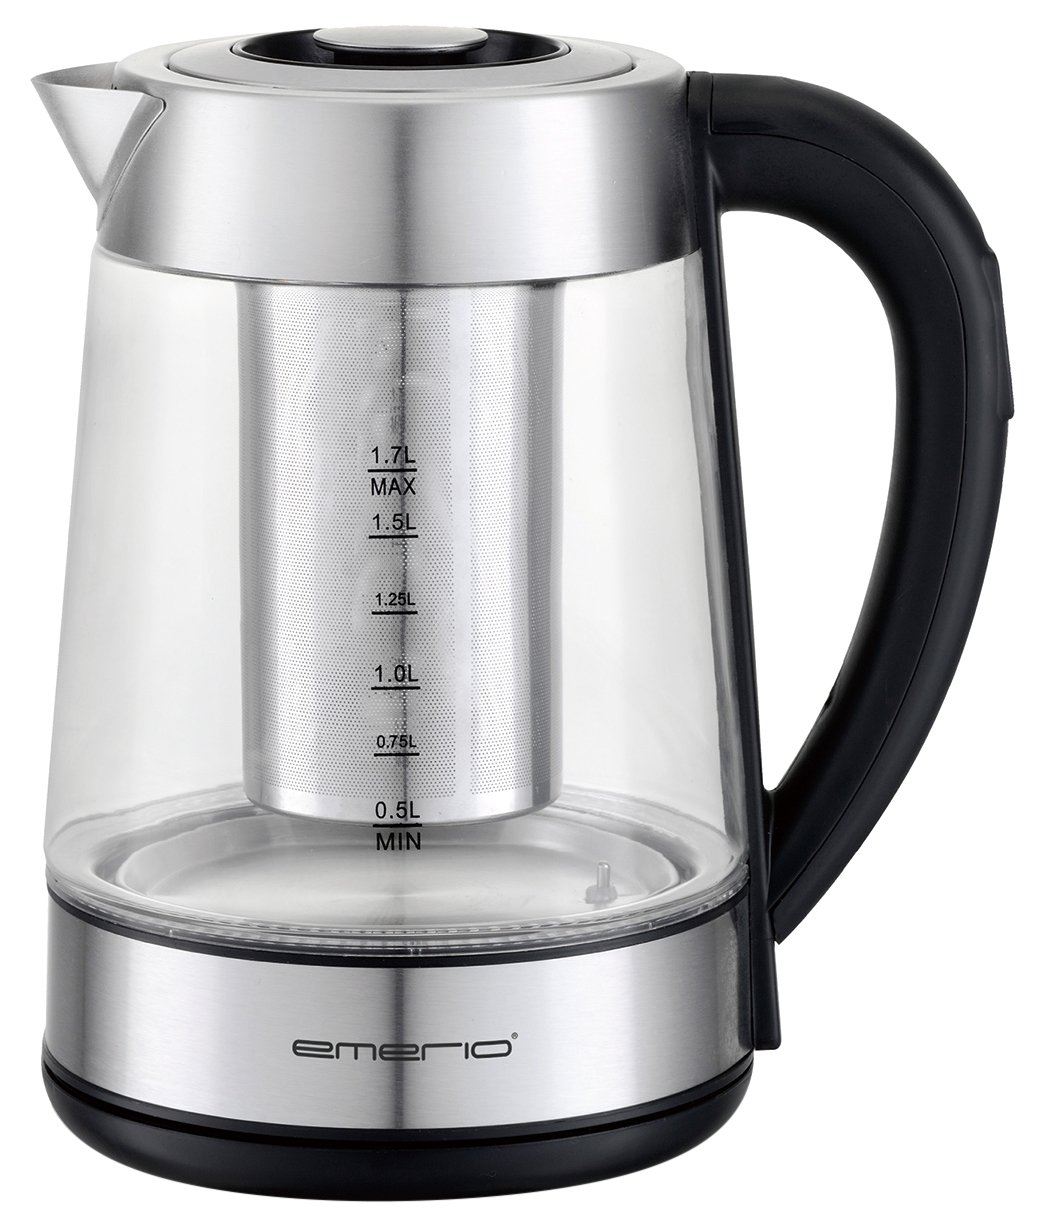 Emerio Glass and Stainless Steel Kettle – 1.8L, Stainless Steel Strainer